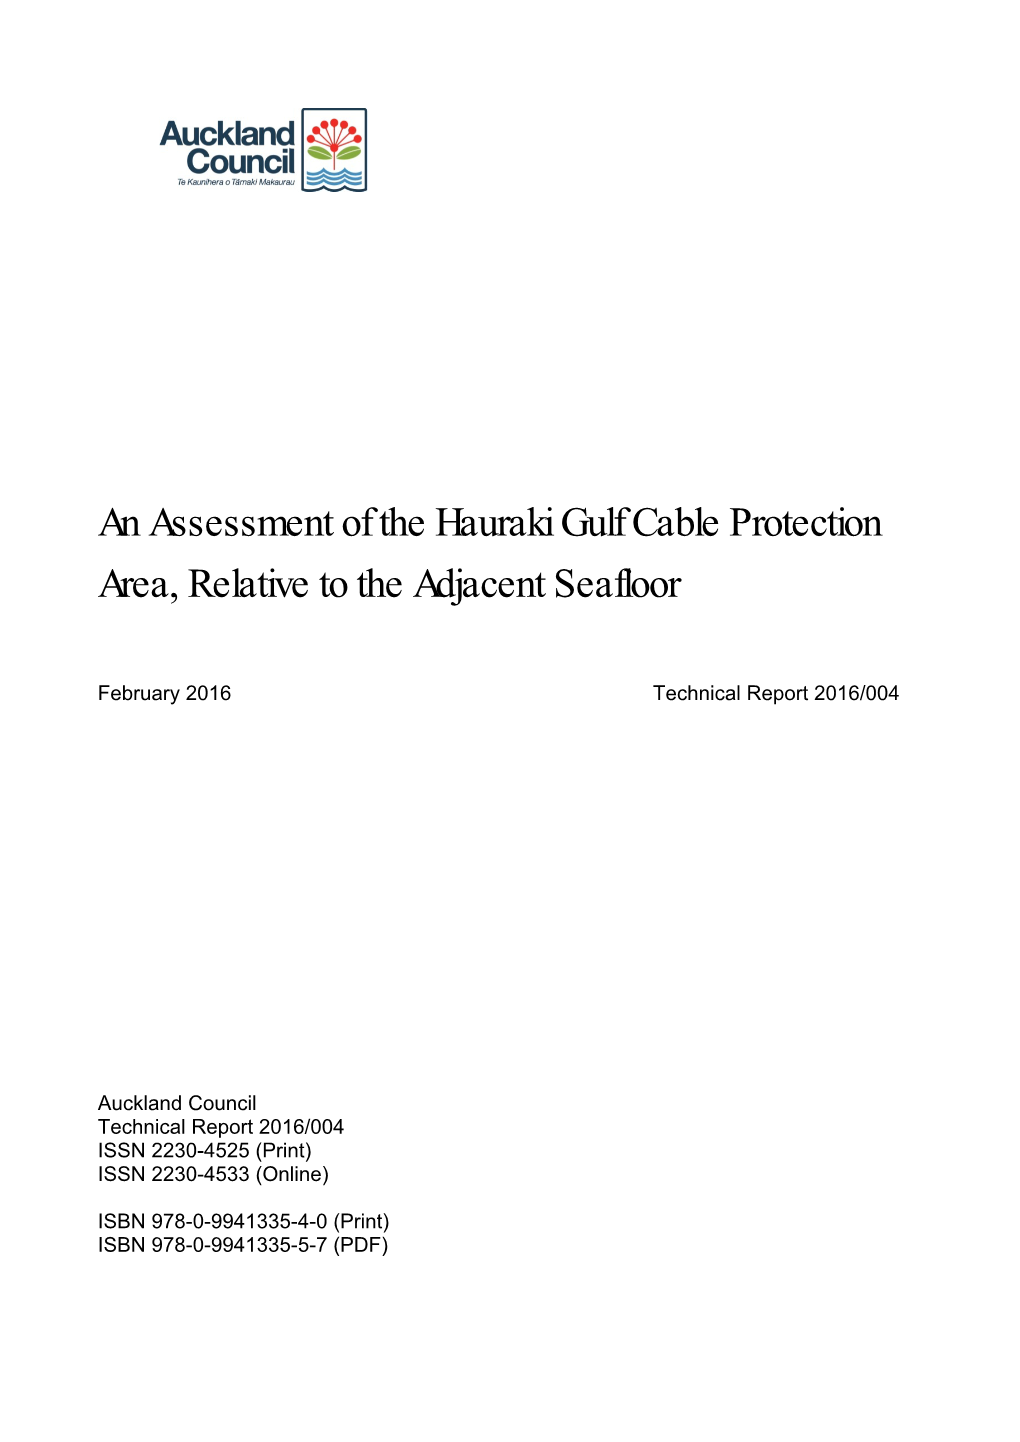 An Assessment of the Hauraki Gulf Cable Protection Area, Relative to the Adjacent Seafloor